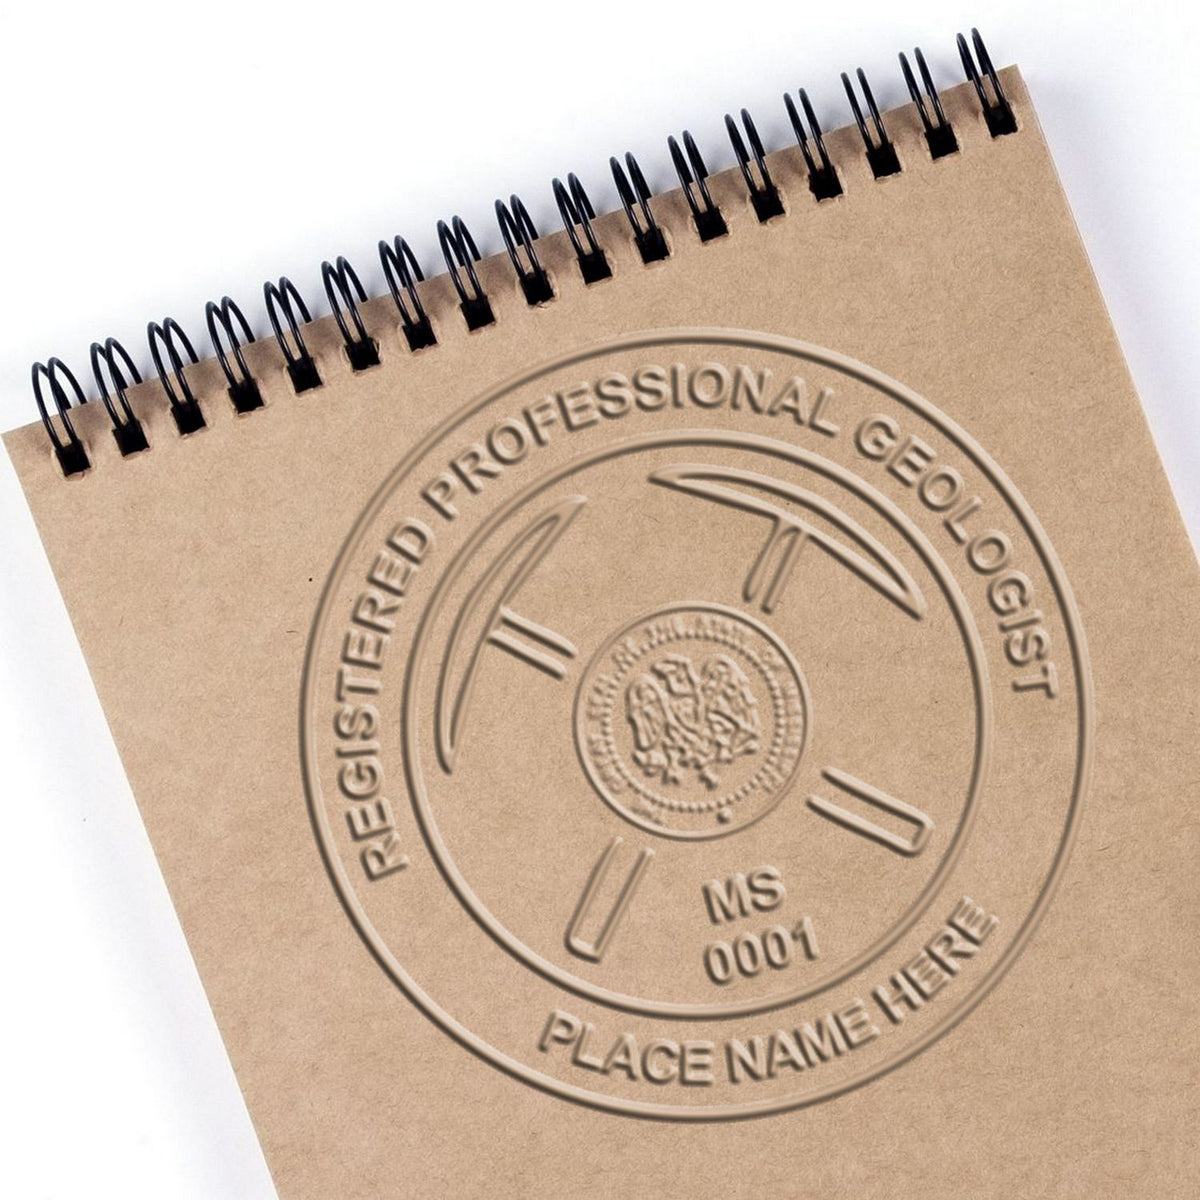 An alternative view of the Soft Mississippi Professional Geologist Seal stamped on a sheet of paper showing the image in use